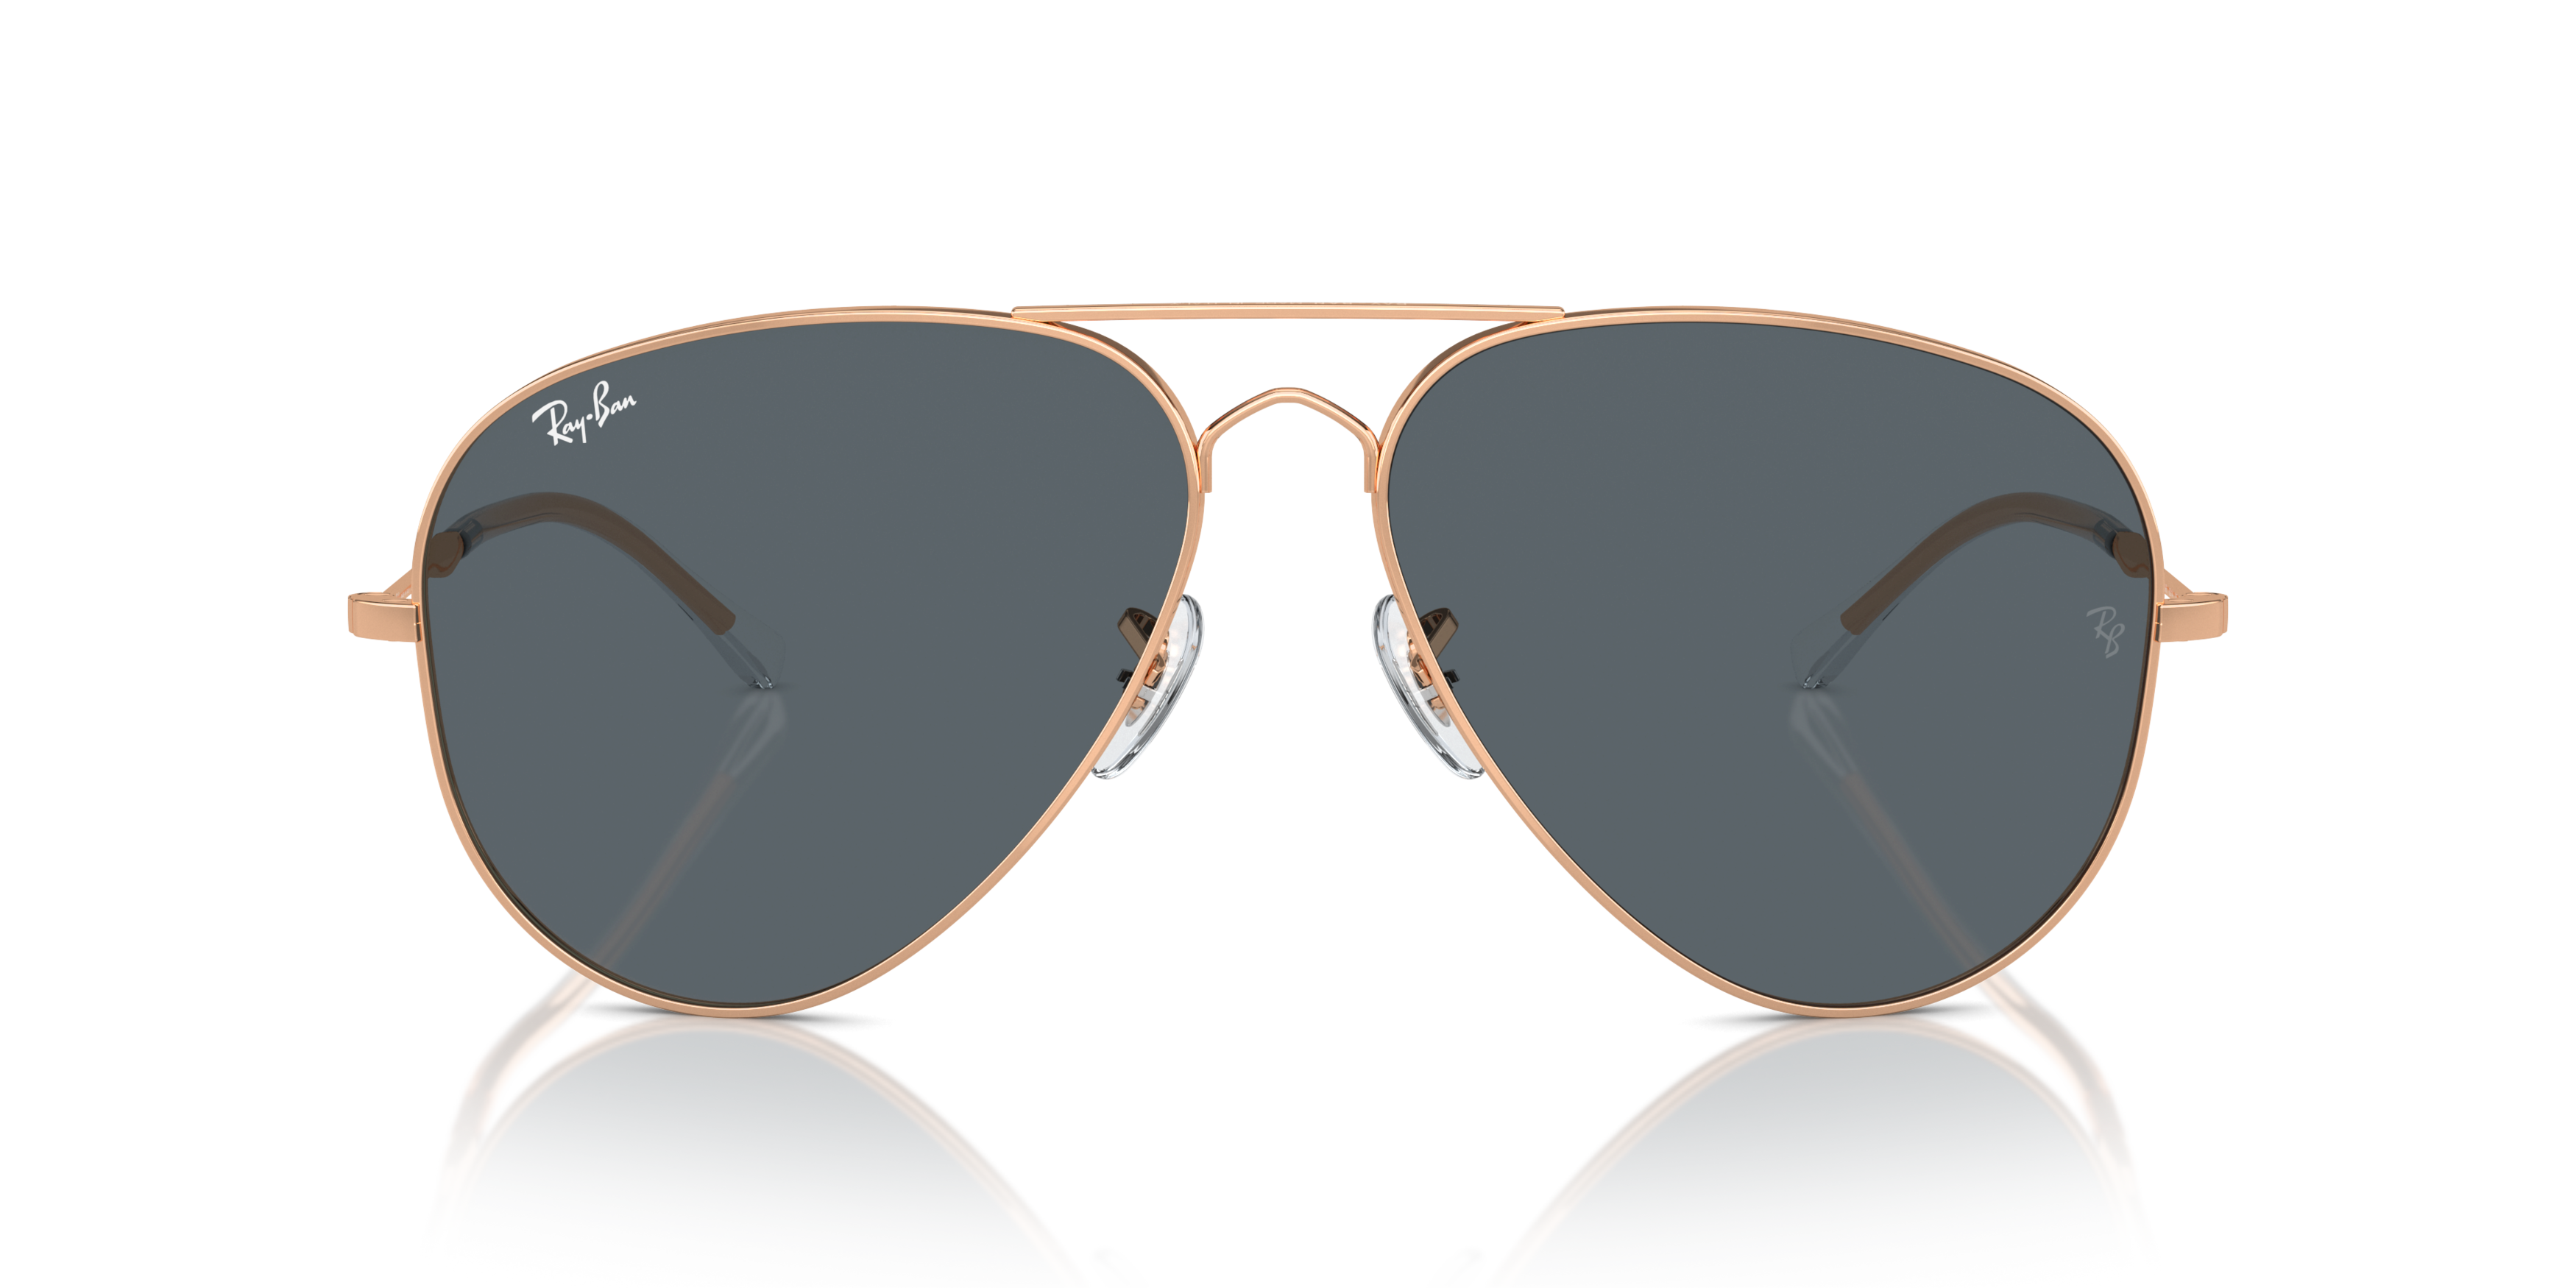 [products.image.front] Ray-Ban Old Aviator RB3825 9202R5